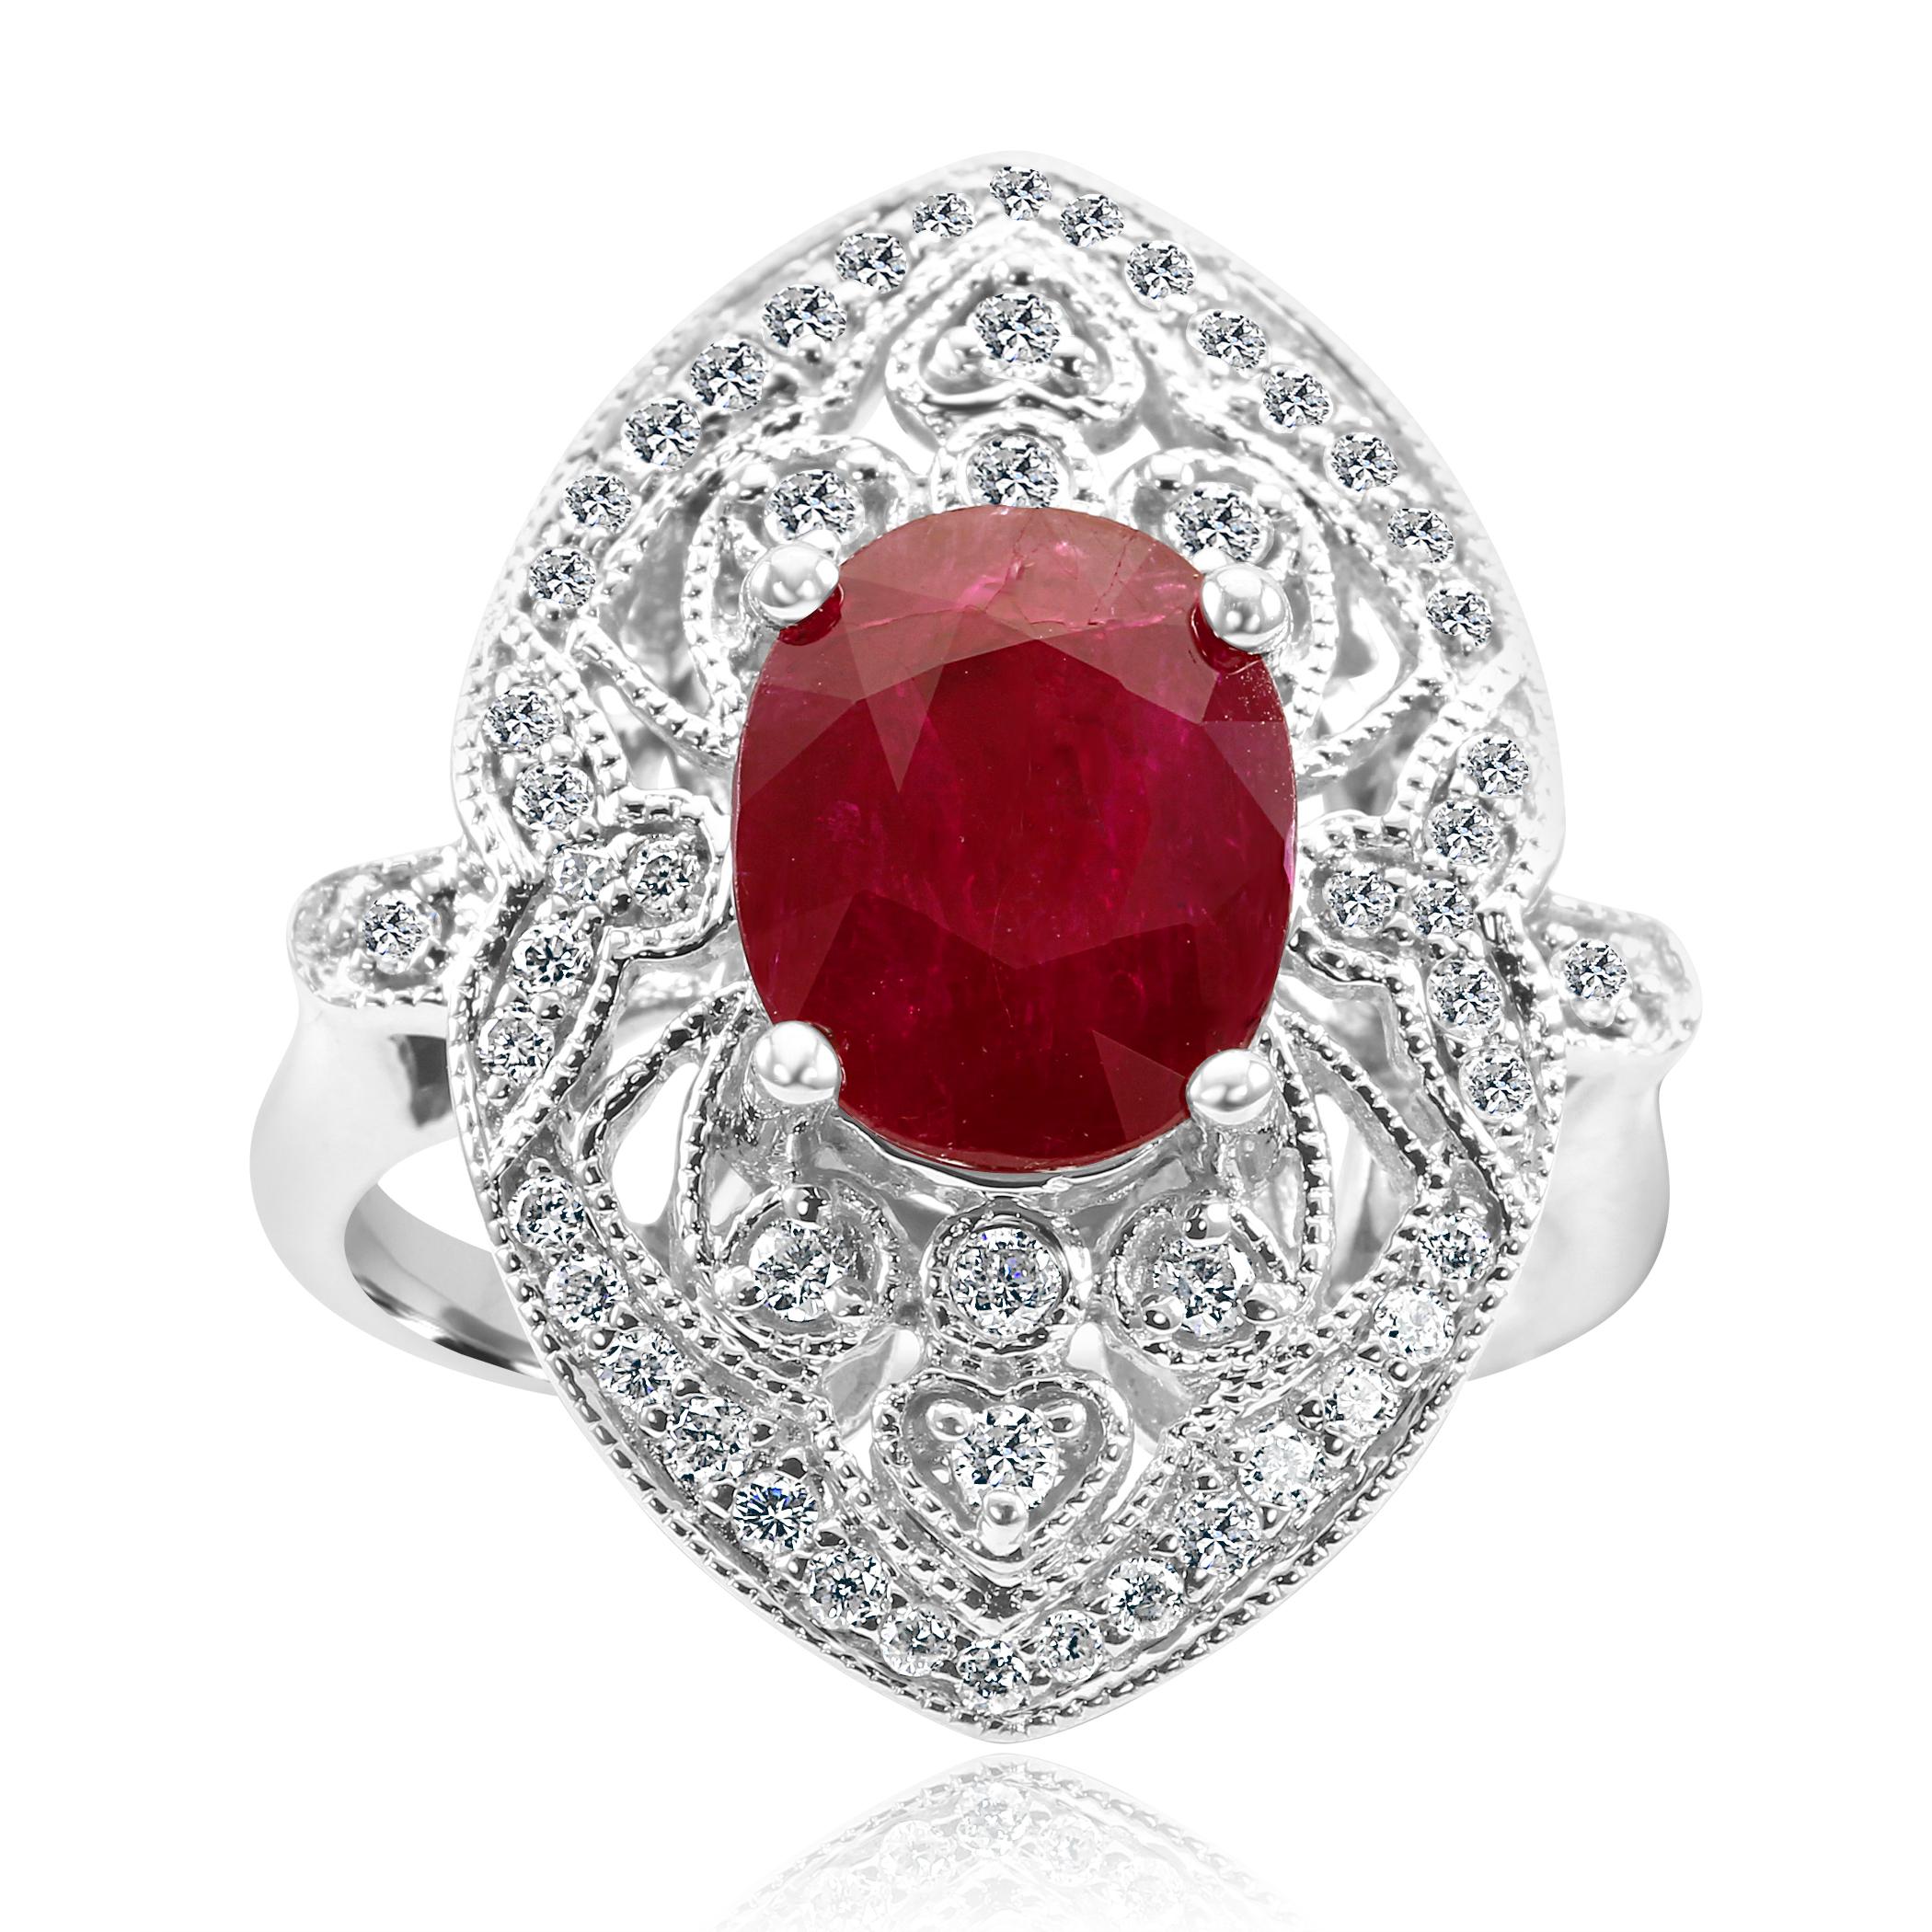 Gorgeous Ruby Oval 3.17 Carat encircled in Halo of 62 Colorless G-H Color SI Clarity Diamond Rounds 0.45 Carat set in Art Deco Style Bridal Cocktail 14K White Gold Ring with millgrain work.

Total Stone Weight 3.62 Carat


Style available in